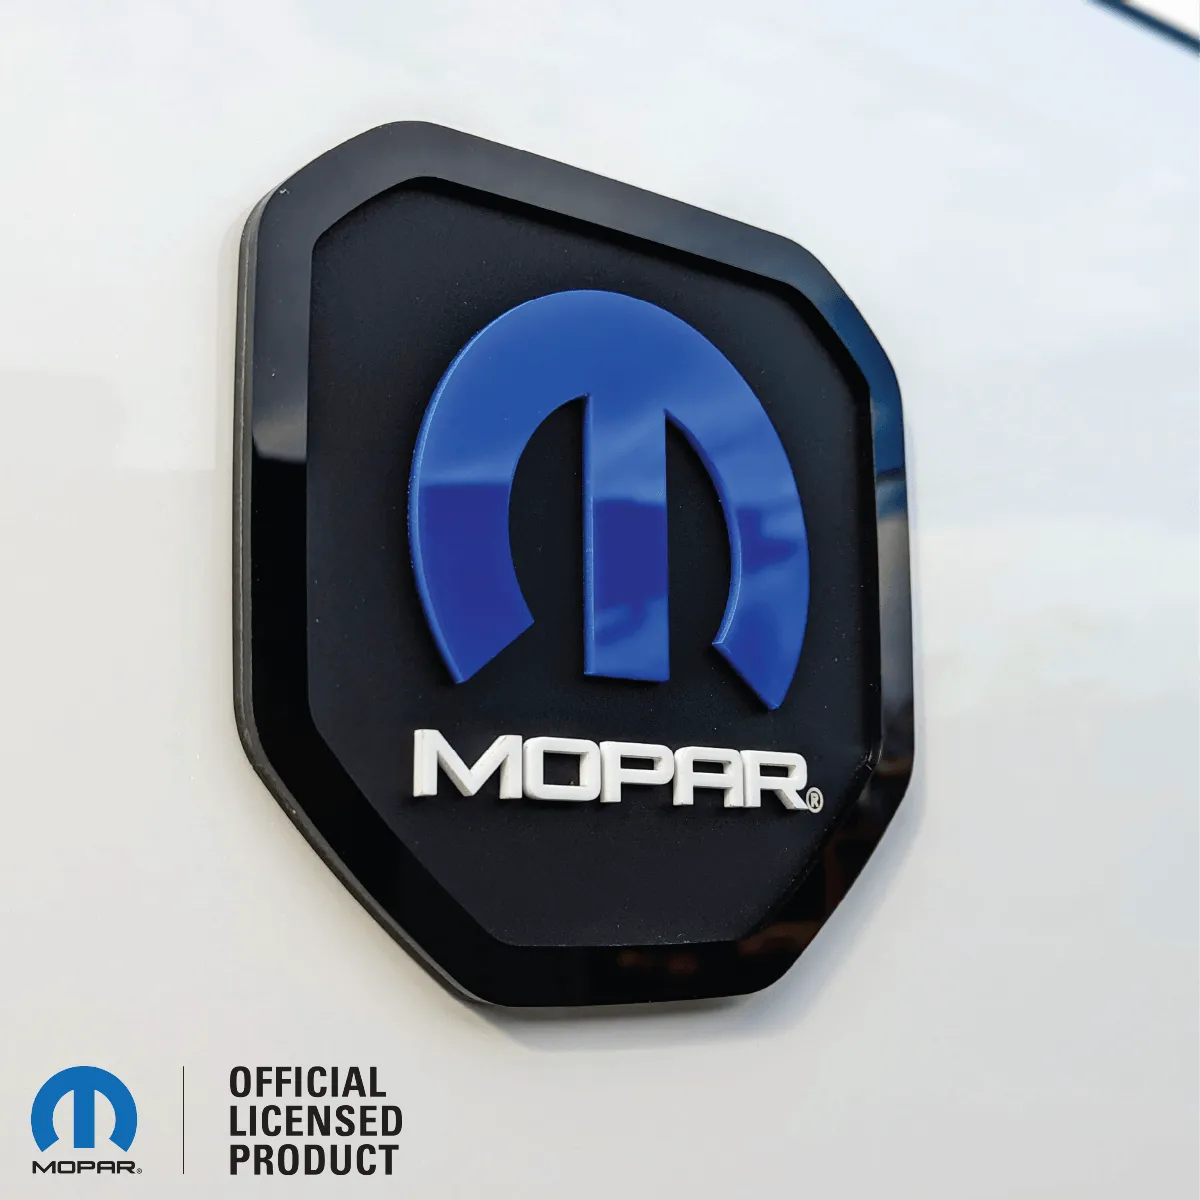 Mopar® Tailgate Badge - Fits 2019+ RAM® Tailgate -1500, 2500, 3500 - Officially Licensed Product